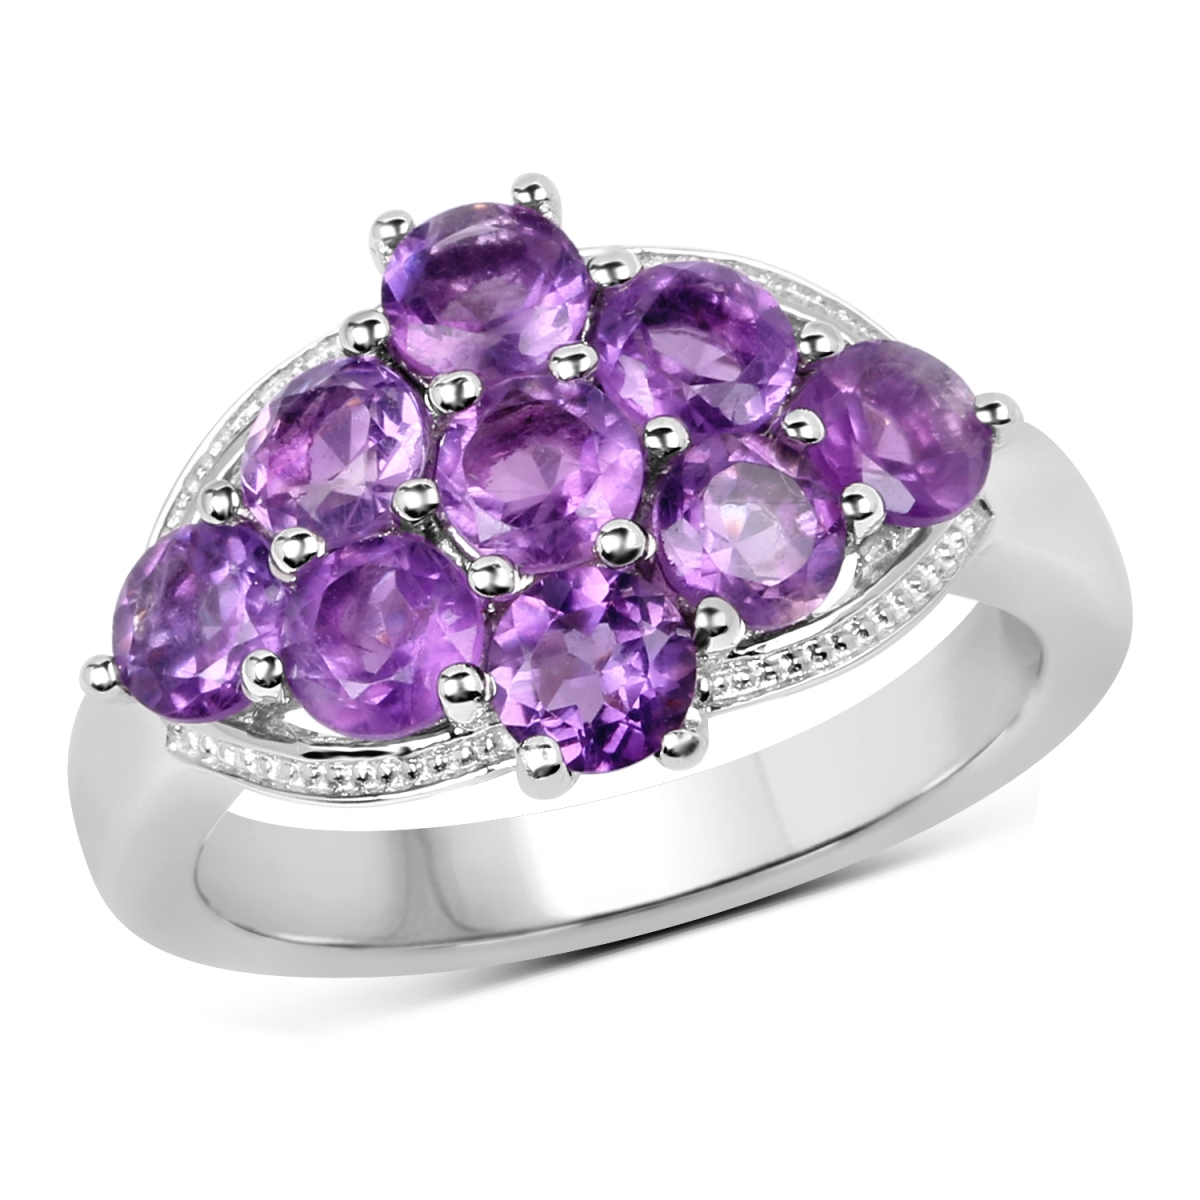 Picture of HauteFacets QR19054A-SSR-6 2.16 Carat Genuine Amethyst 925 Sterling Silver Ring  Purple - Size 6